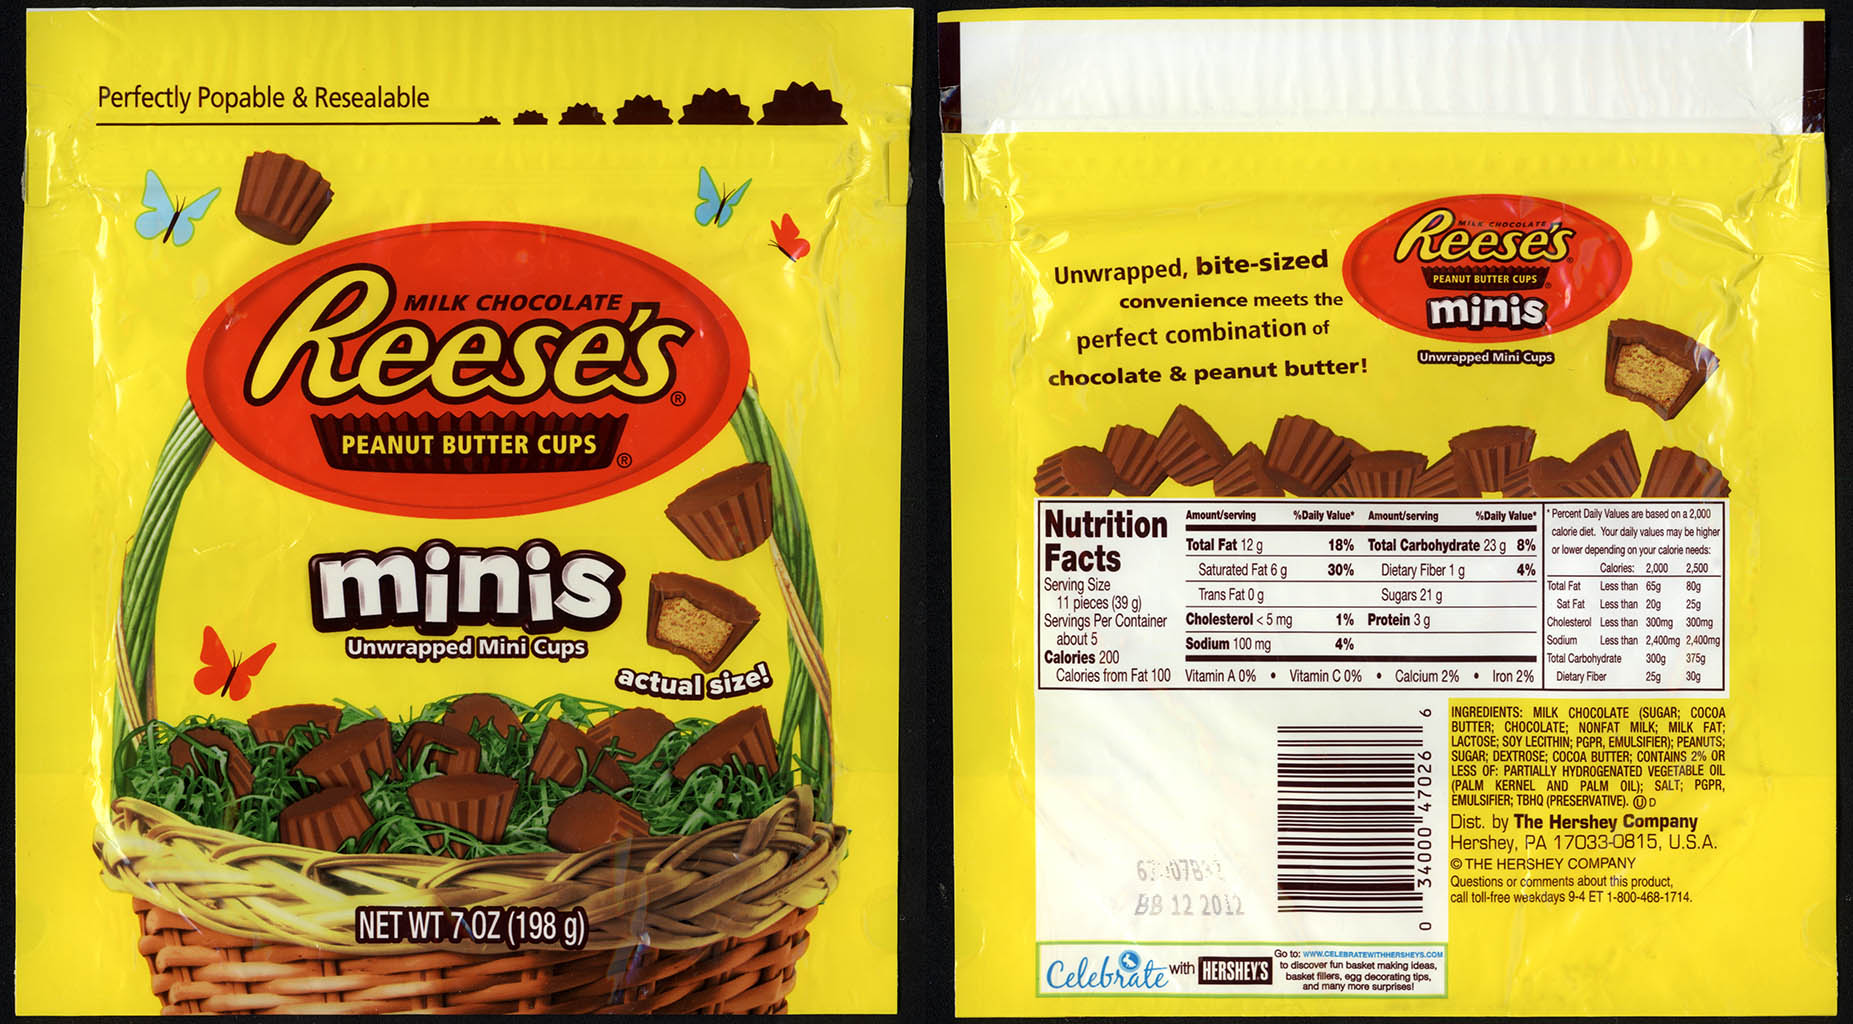 Hershey - Reese's Peanut Butter Cup Minis - 7oz Easter candy package - 2012